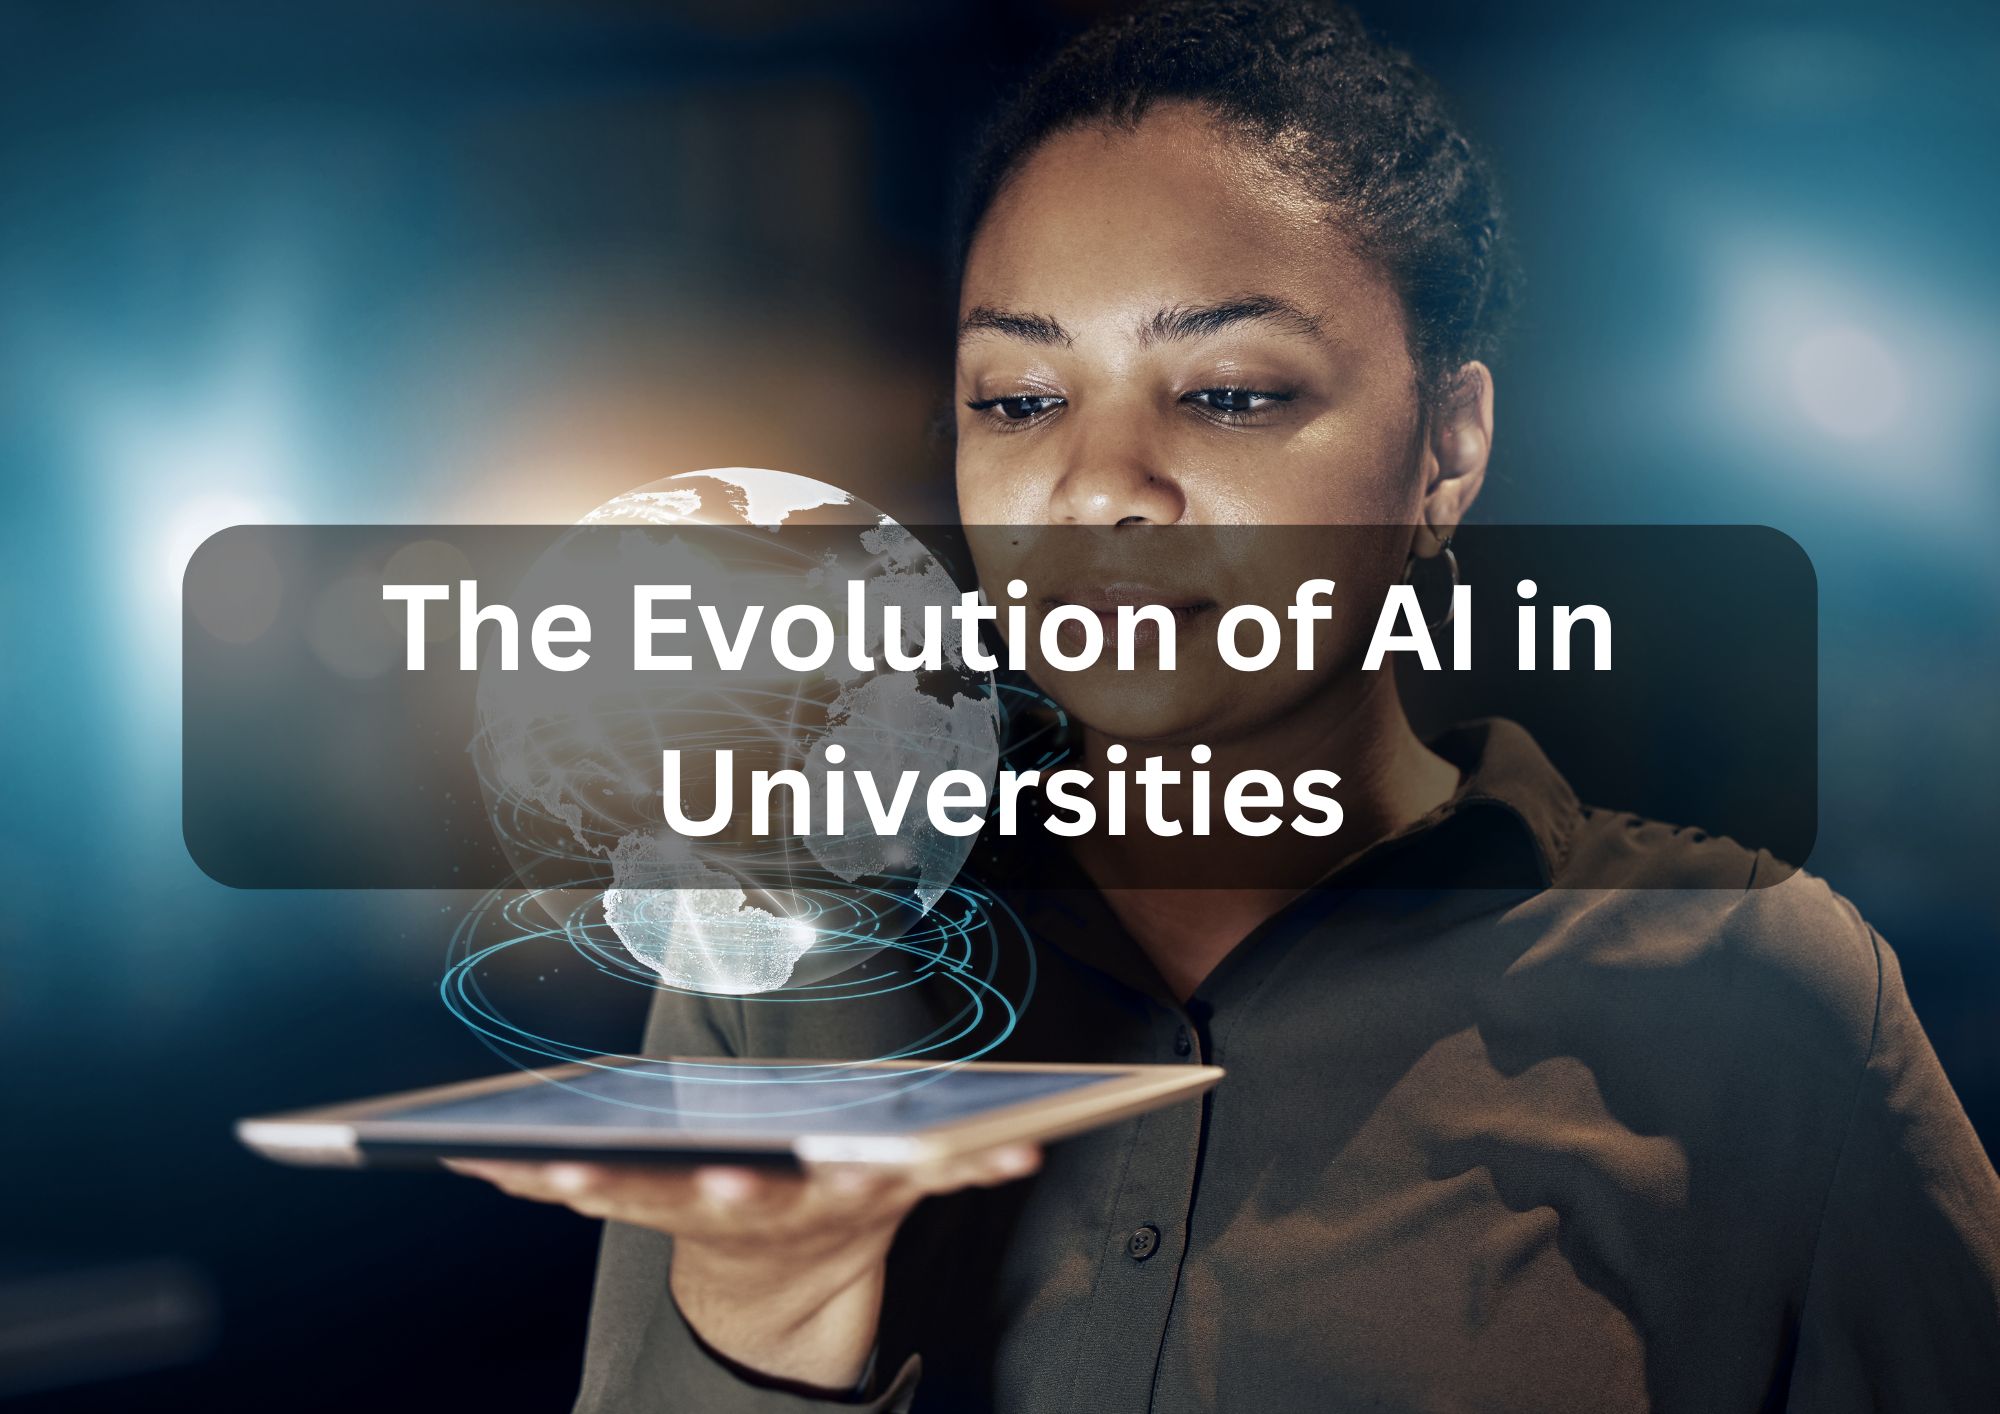 The Evolution of AI in Universities